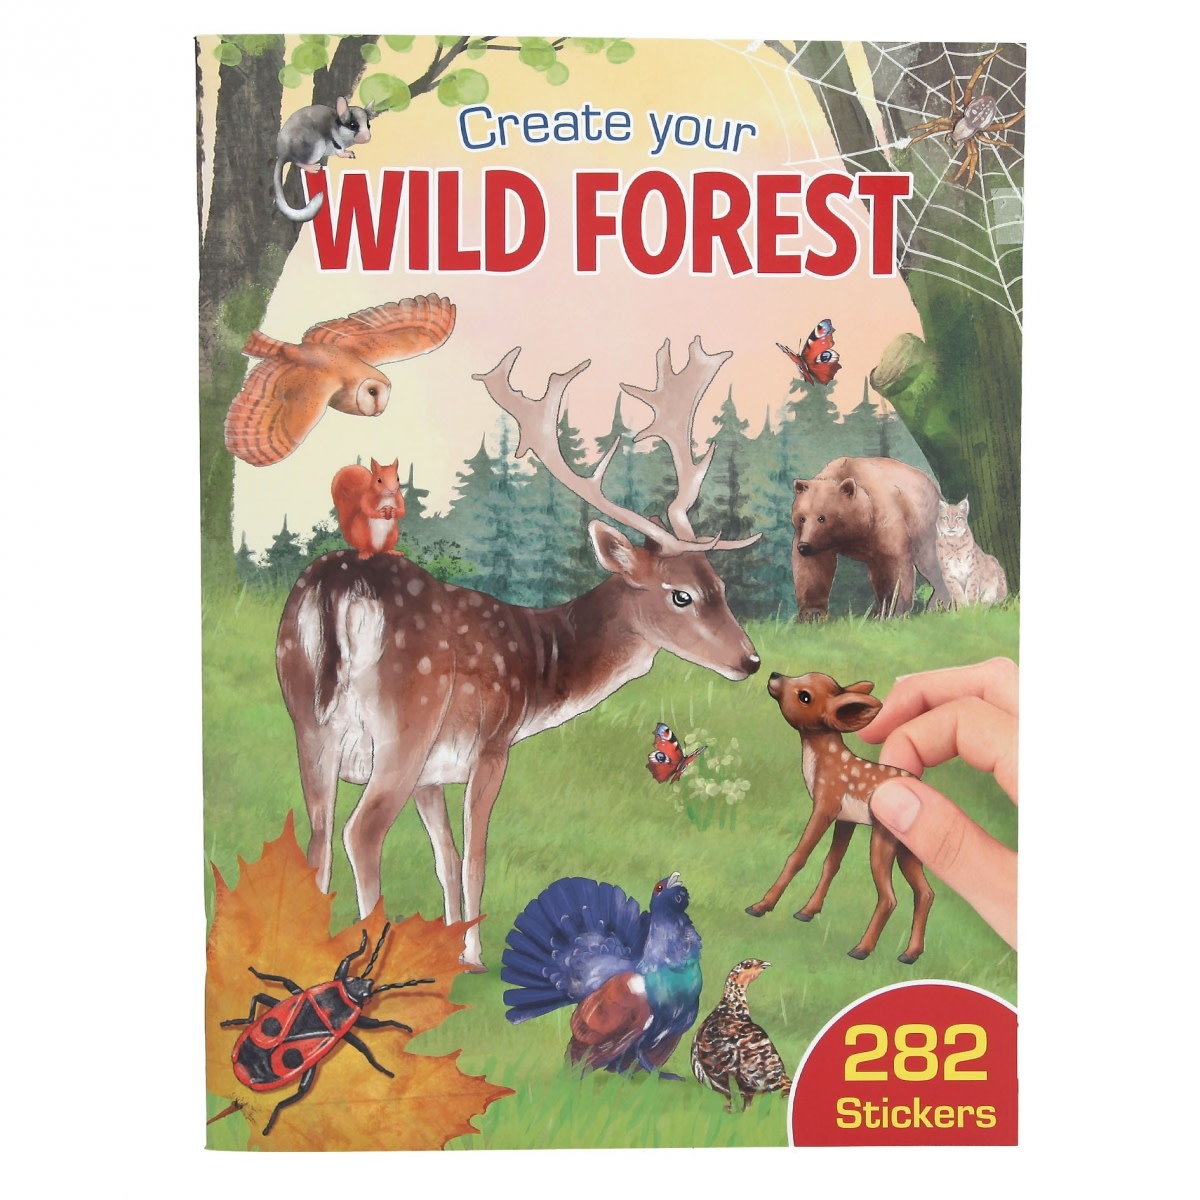 CREATE YOUR WILD FOREST - 527381